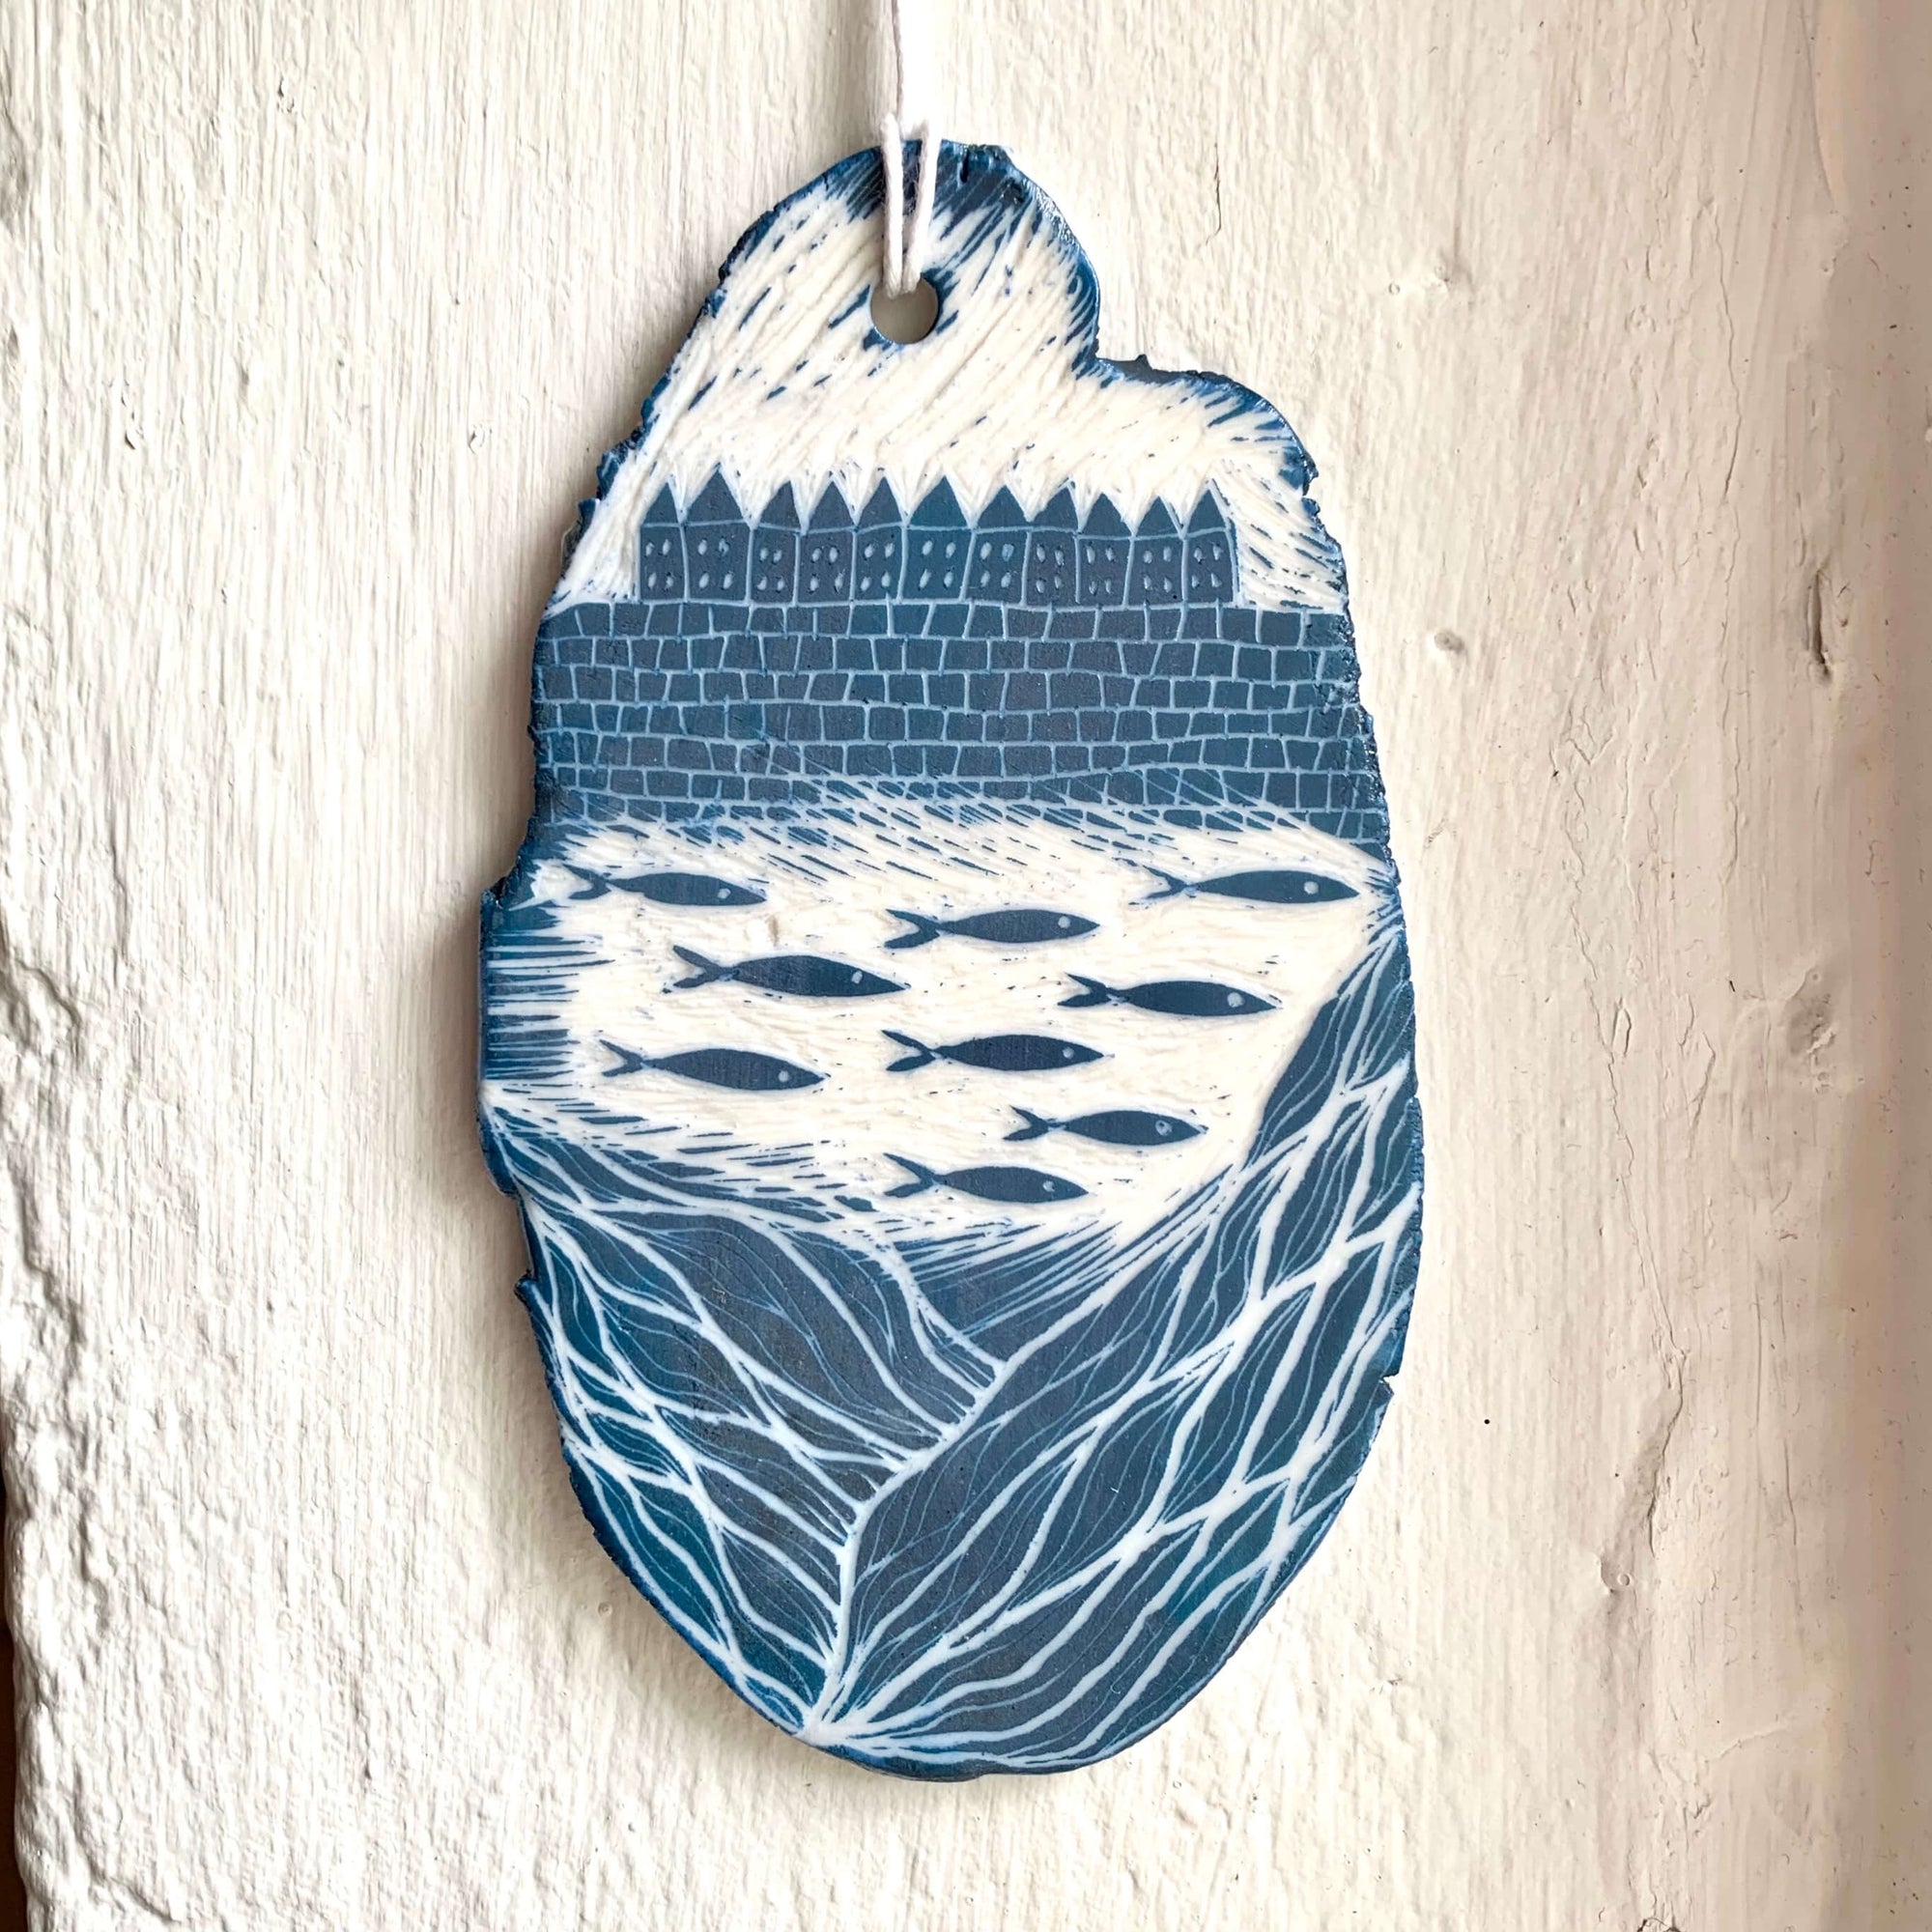 Handcrafted by Sarah Livingstone. White and blue porcelain rough oval shaped hanging, with waves, fishes and seaside town carved into it.